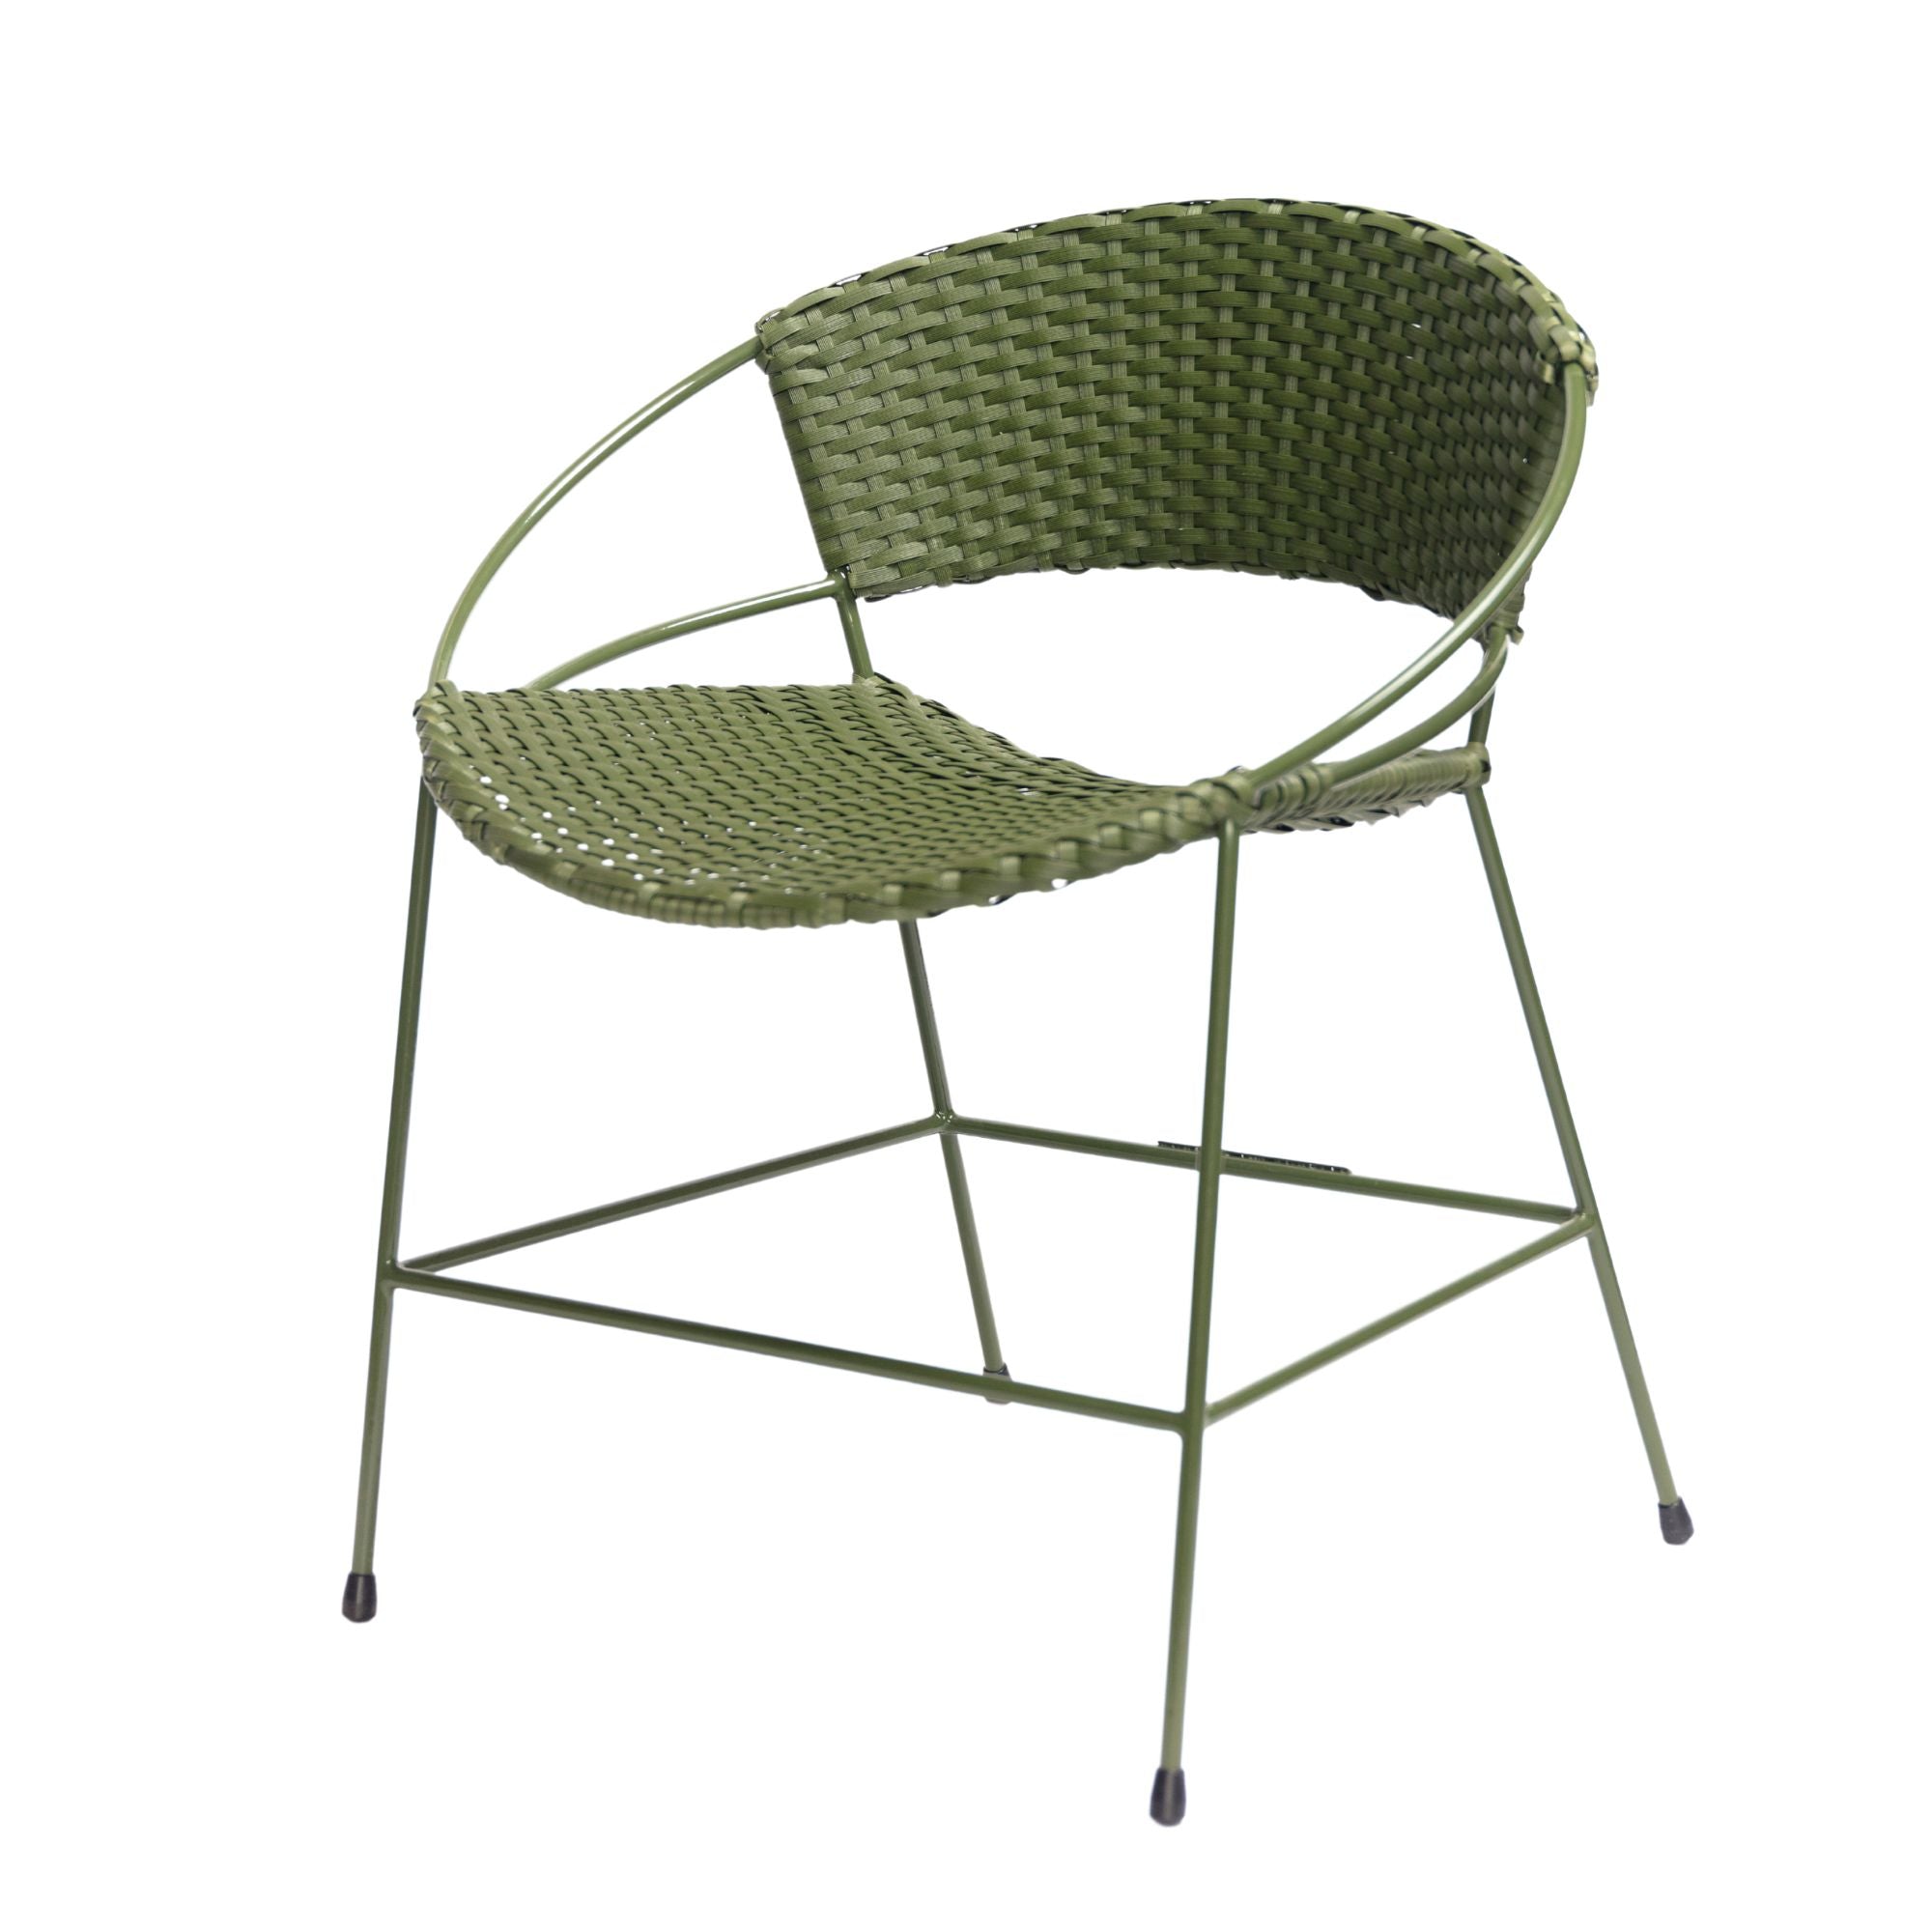 Woven Outdoor Dining Chair - Bali